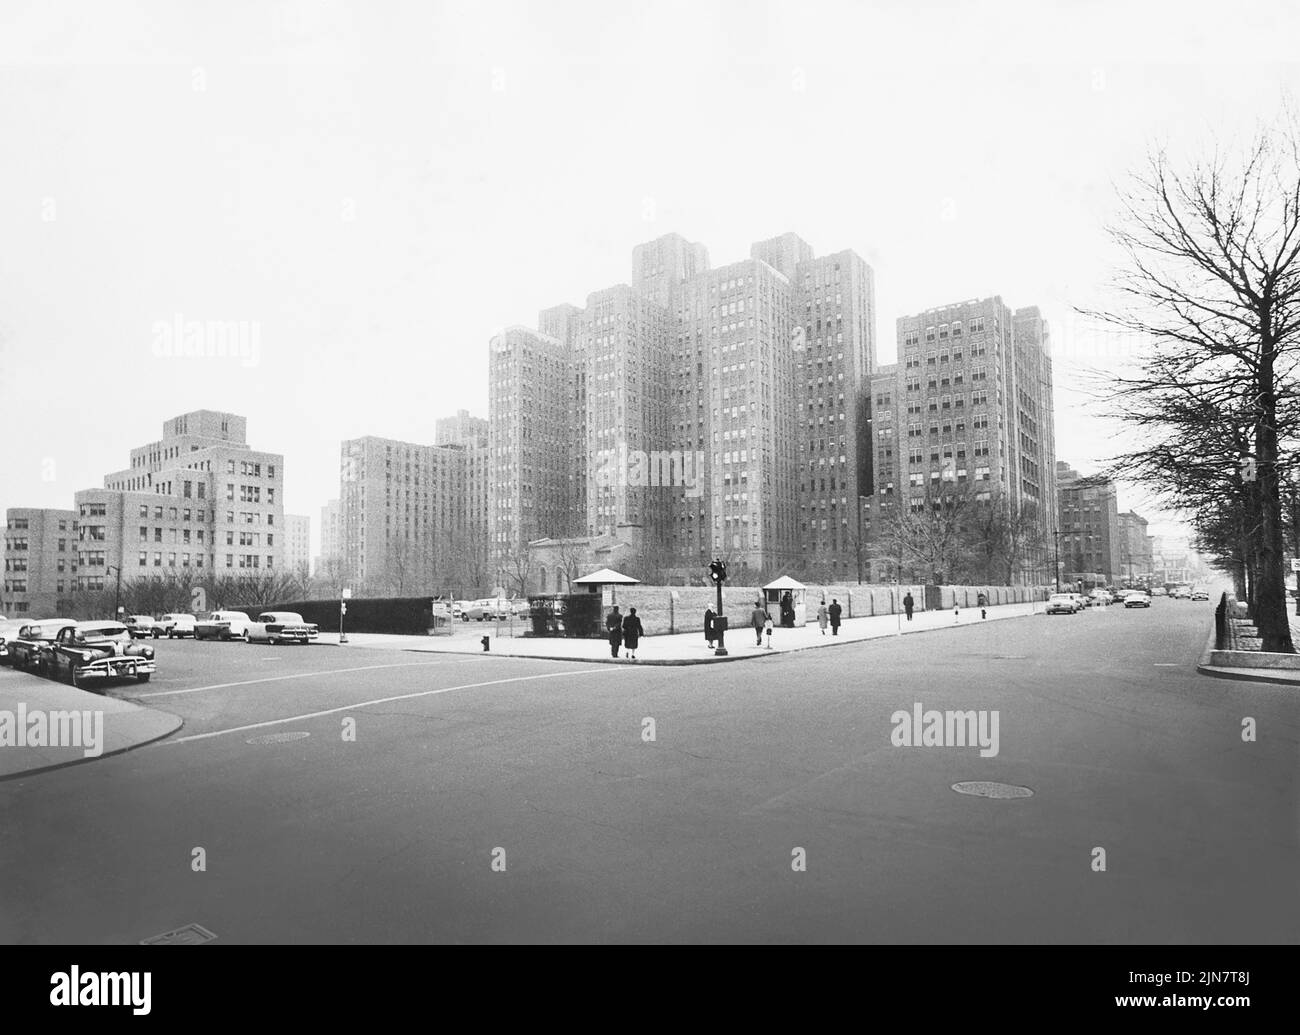 Street view of Columbia Presbyterian Medical Center looking northwest across Broadway from 165th Street, Washington Heights, Manhattan, New York City, New York, USA, Angelo Rizzuto, Anthony Angel Collection, January 1958 Stock Photo